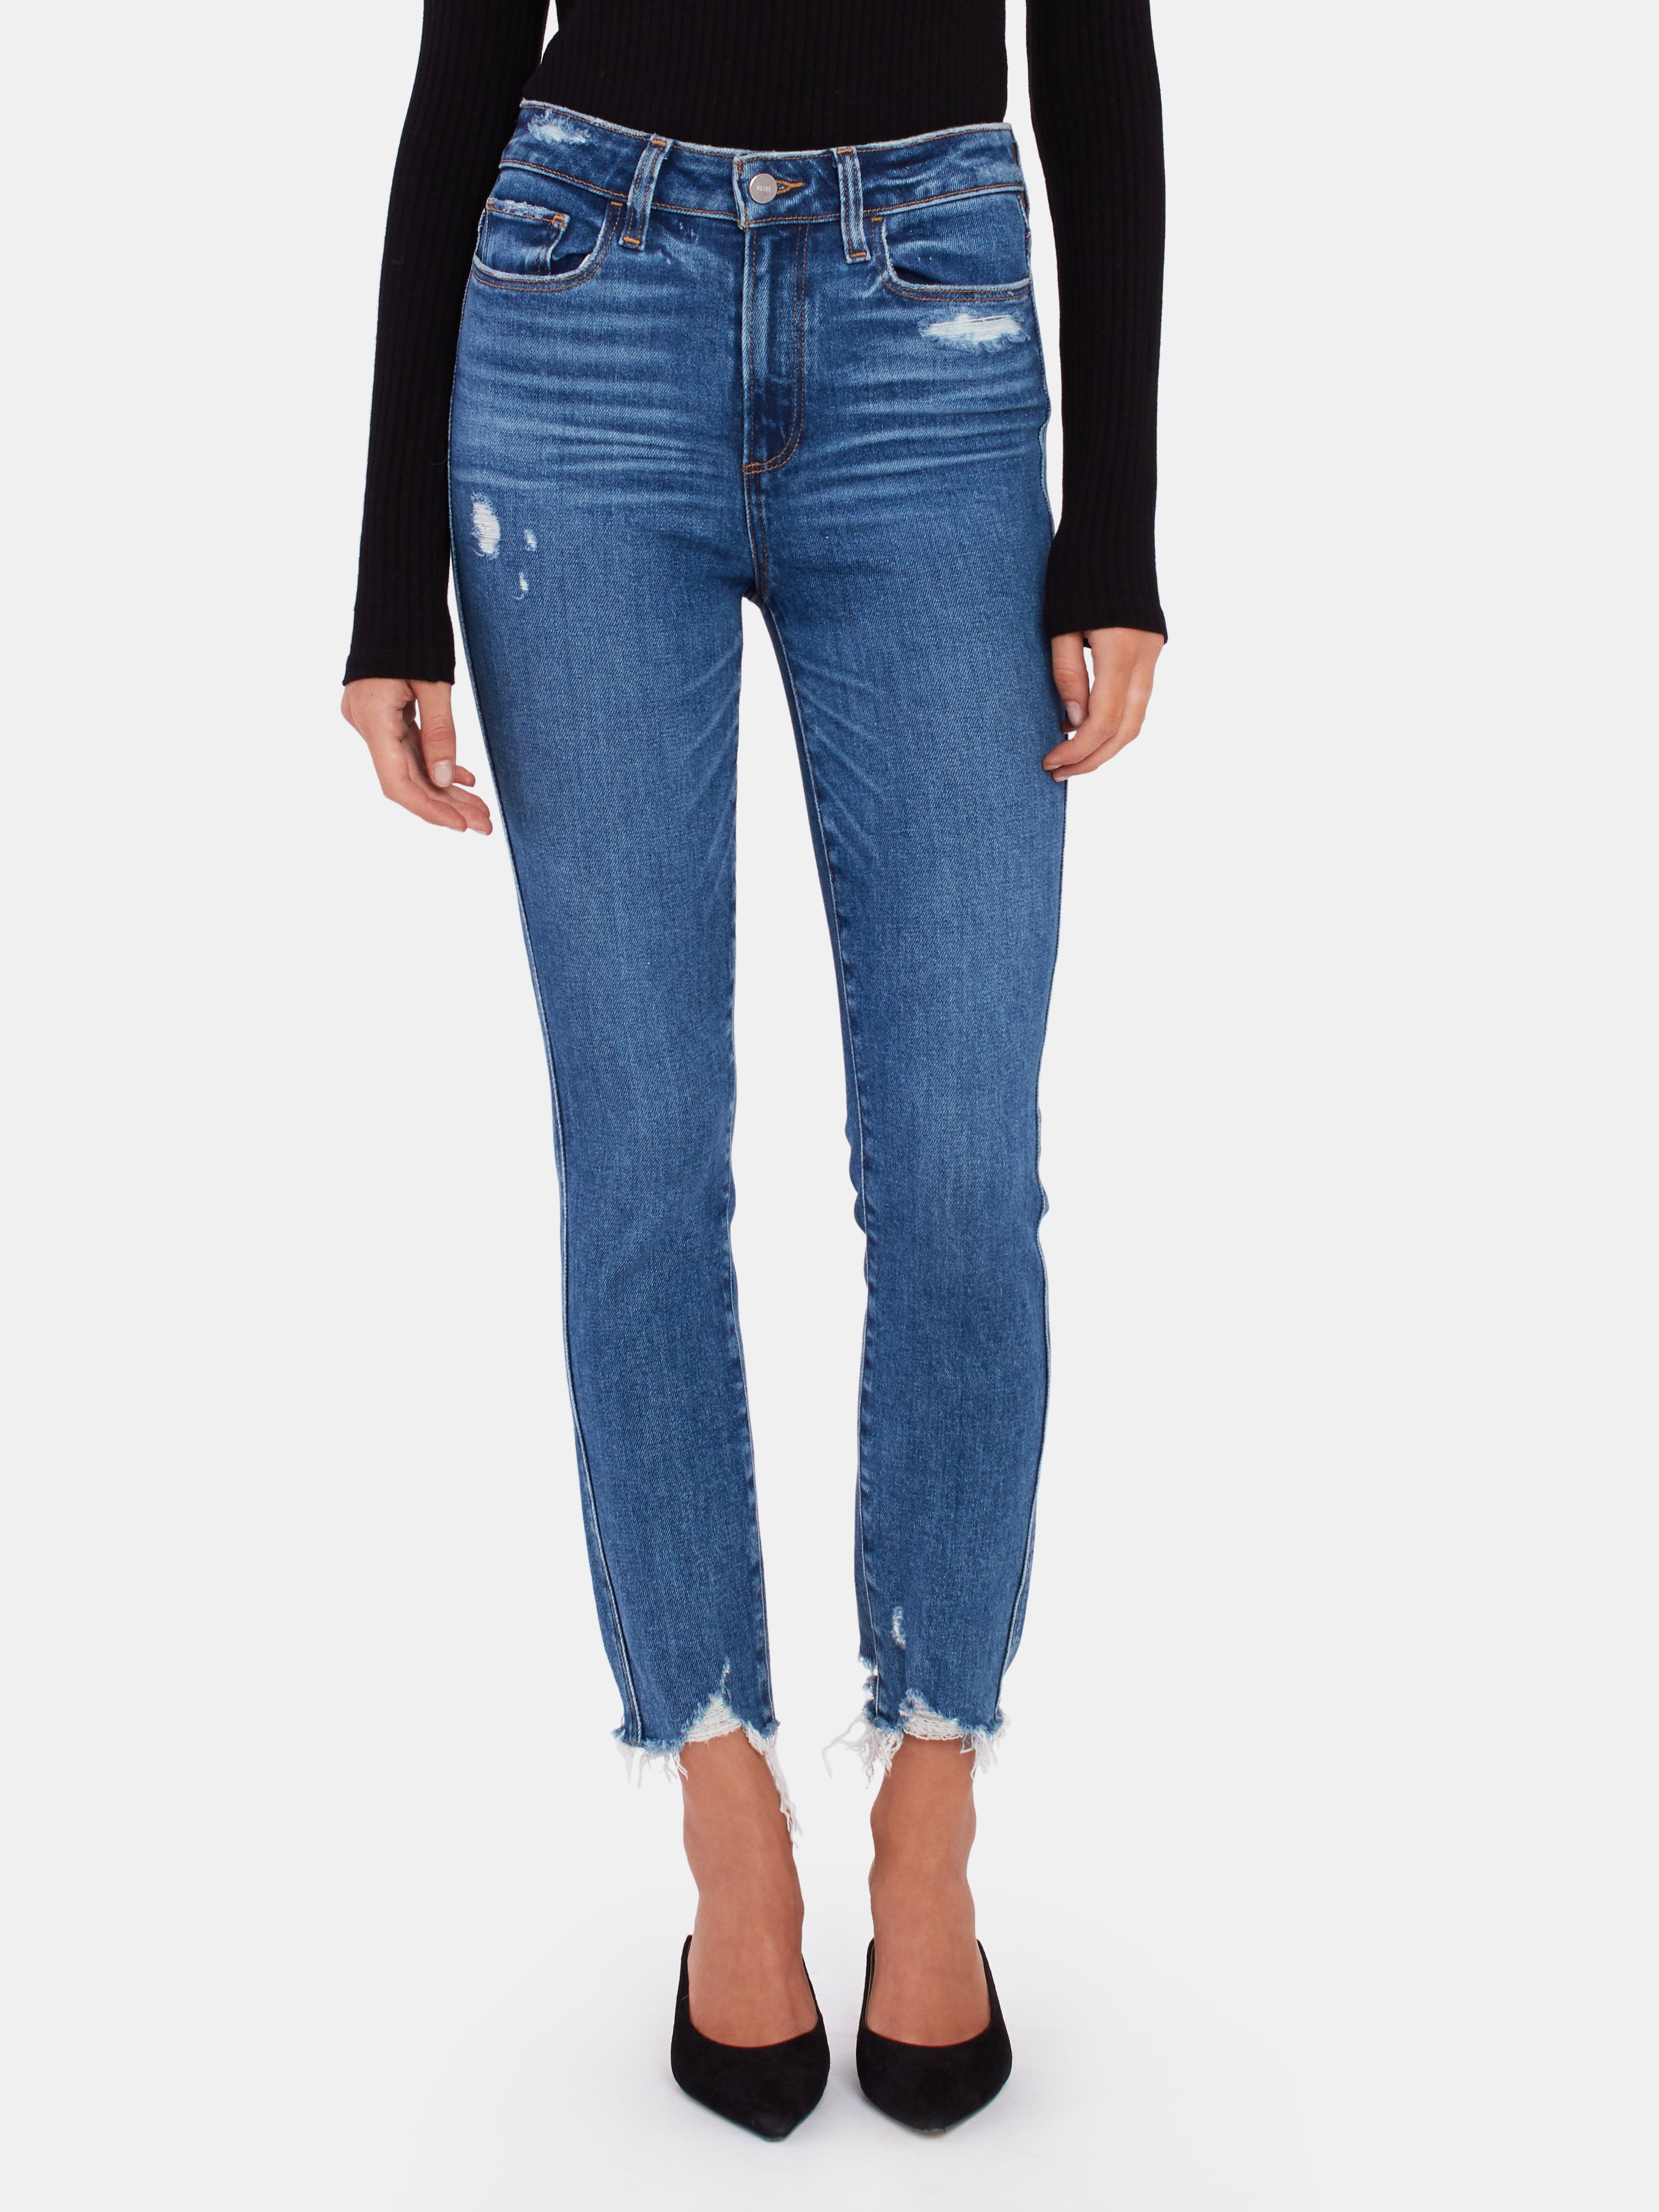 paige hoxton high rise ankle skinny